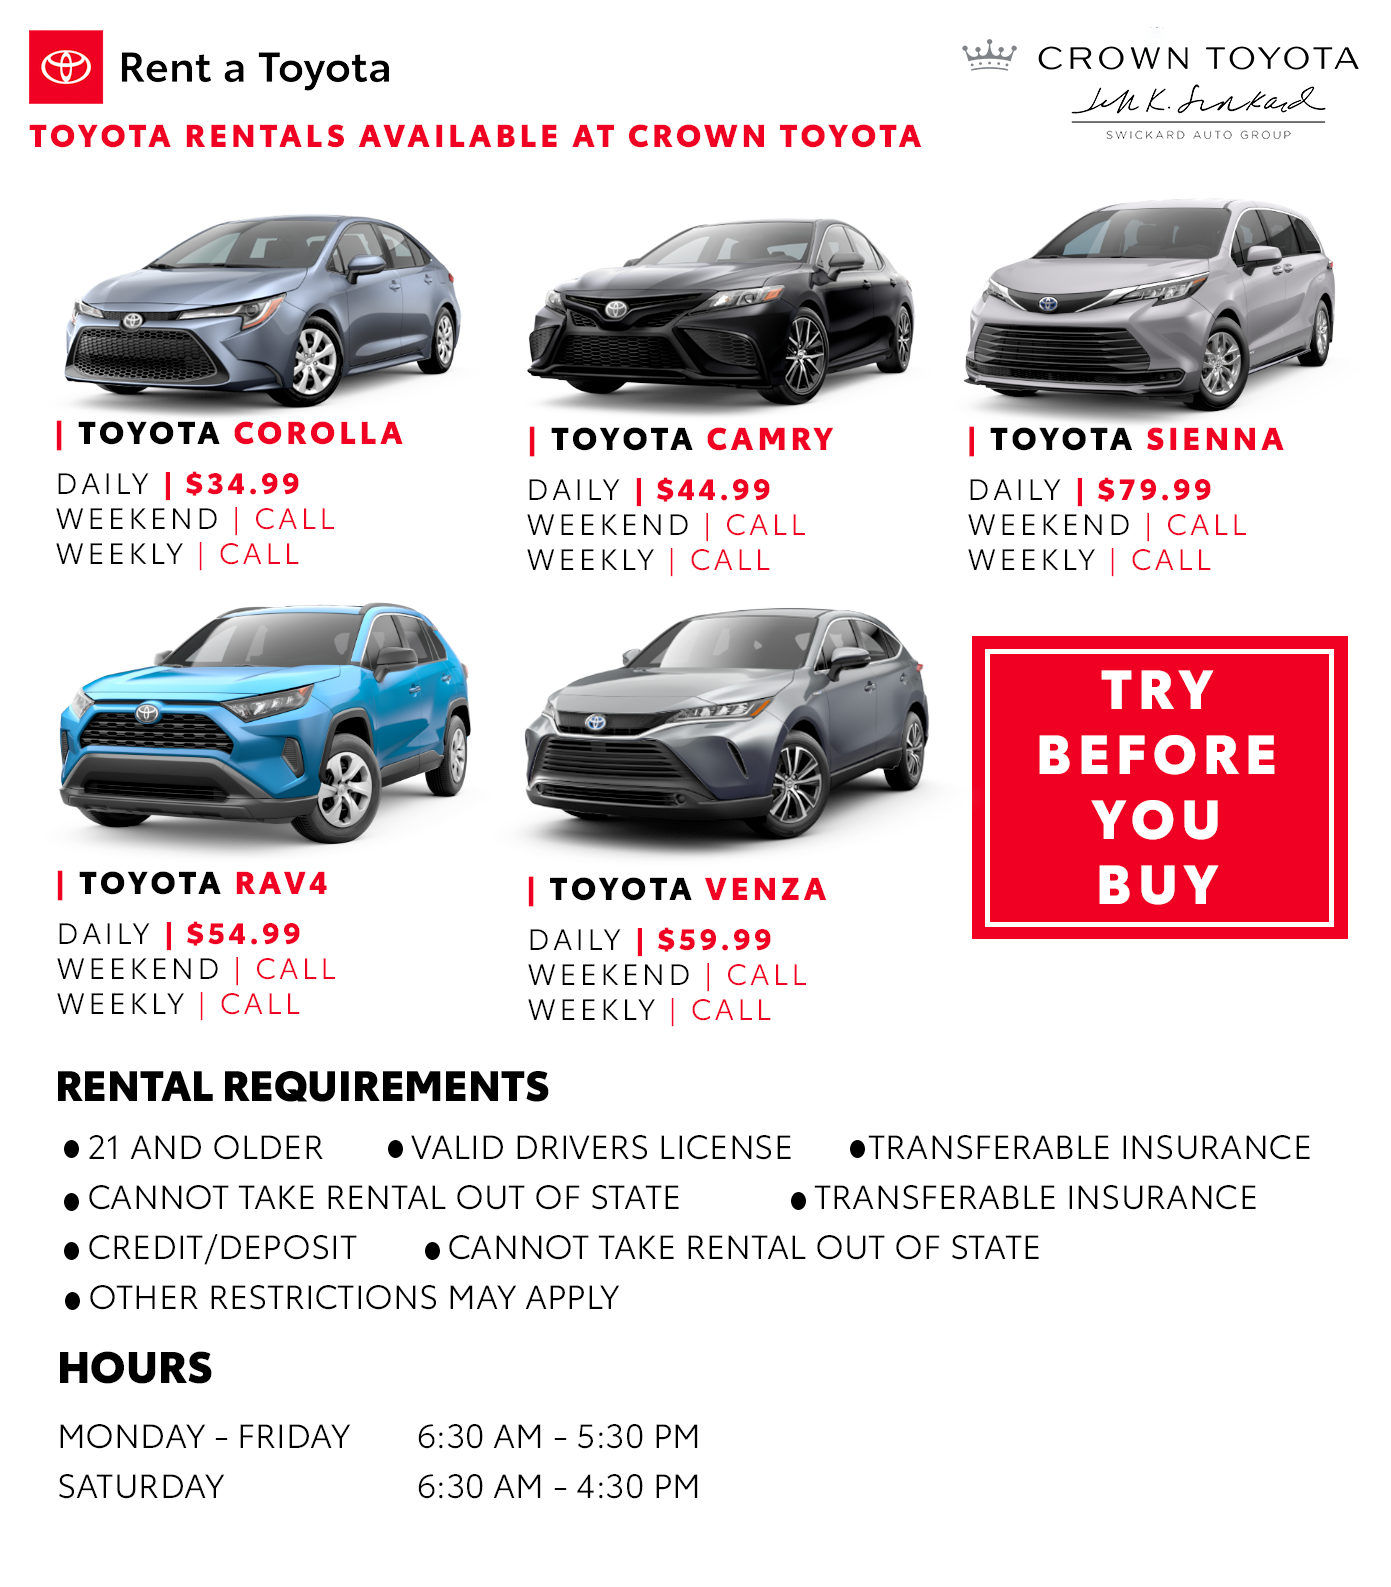 Toyota Rentals available at Crown Toyota